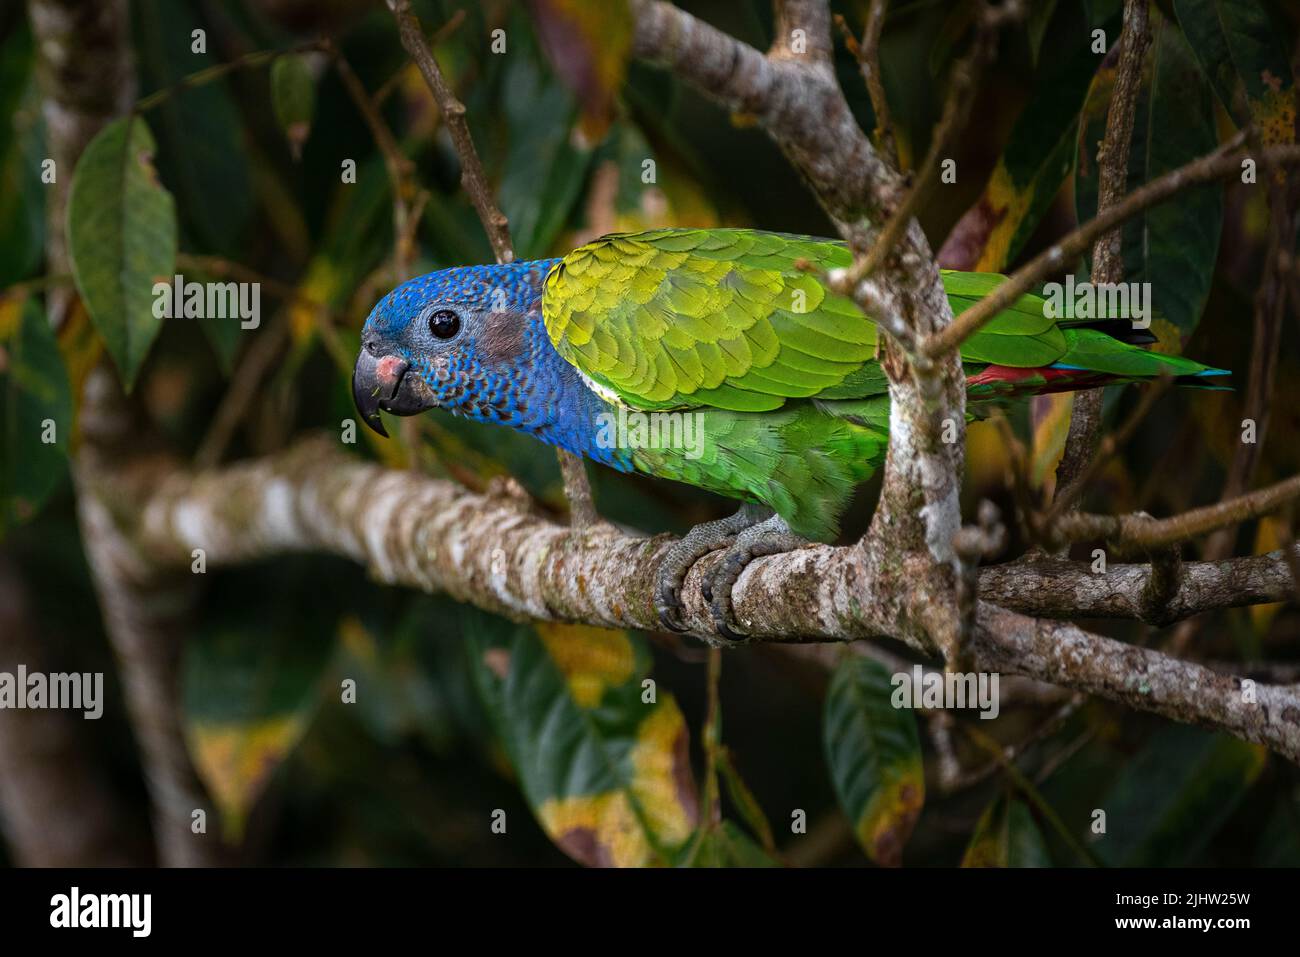 Blue headed parrot closeup photo taken in the rain forest of Panama Stock Photo